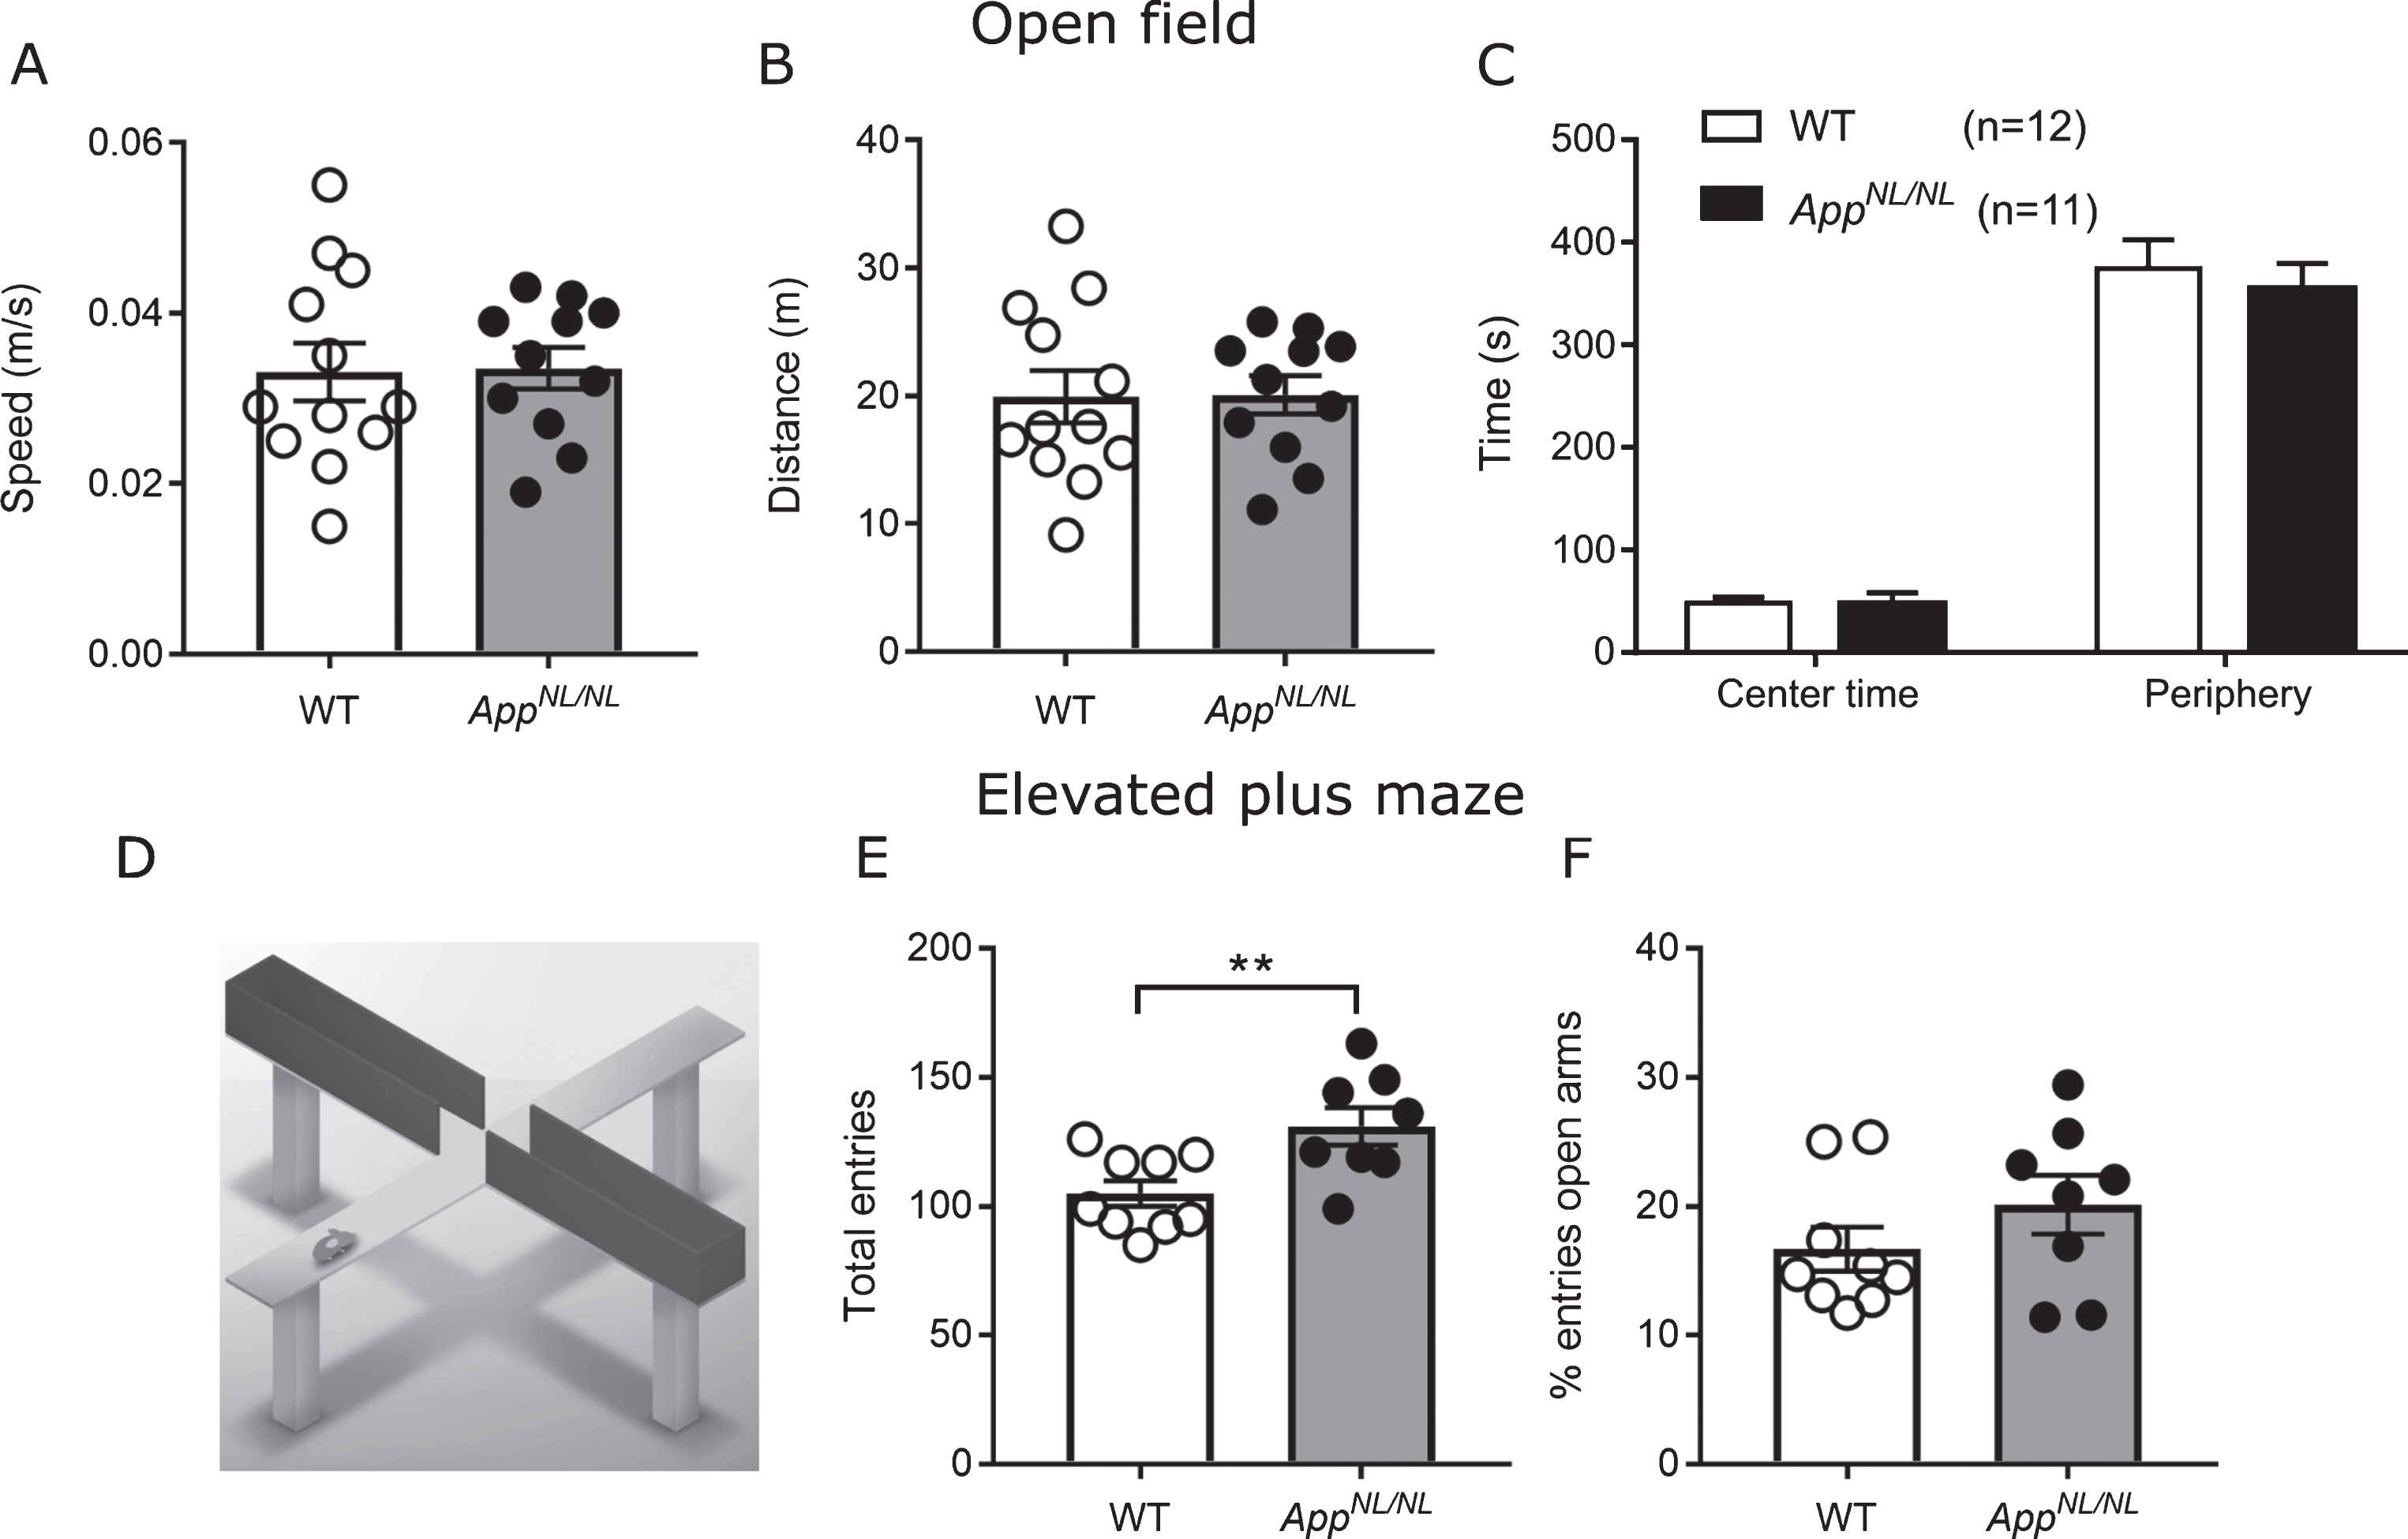 No major locomotor and anxiety-related alterations in 24-month-old AppNL/NL mice. A) Average mean speed and distance travelled (B) during the 10 min free exploration in the open field. C) Time spent in the center versus the periphery areas in the open field task n = 12 WT; 11 AppNL/NL mice. D) Explanatory diagram showing the 2 open and 2 closed arms from the elevated plus maze. E) Elevated plus maze shows an increased number of total entries to the open and closed arms in old AppNL/NL (n = 8) mice compared to WT (n = 9). F) No differences in the percentage of entries to the open arms, normalized to the total number of entries between the two genetic groups. Histograms show the mean (±S.E.M). Statistical significance (*p < 0.05, **p < 0.005) was evaluated with an unpaired T-test.